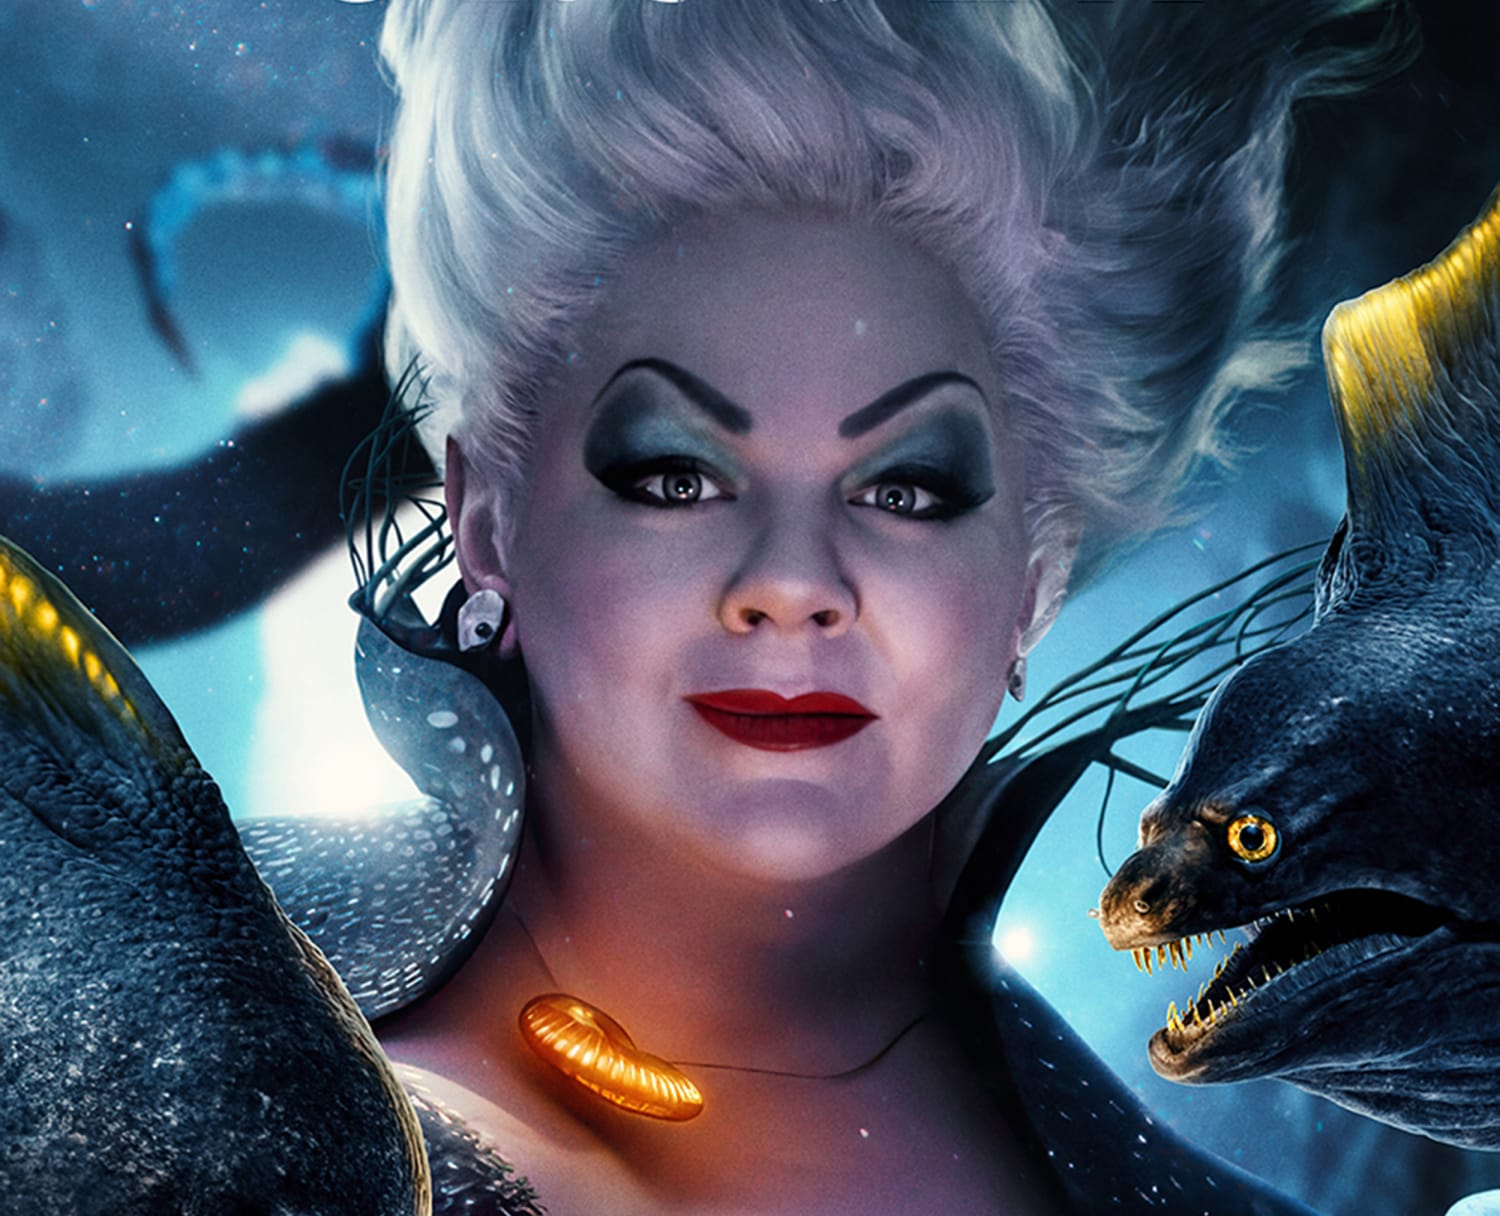 Should Ursula Have Been A Drag Queen? Drag Stars Weigh In On Little Mermaid Queer Legacy